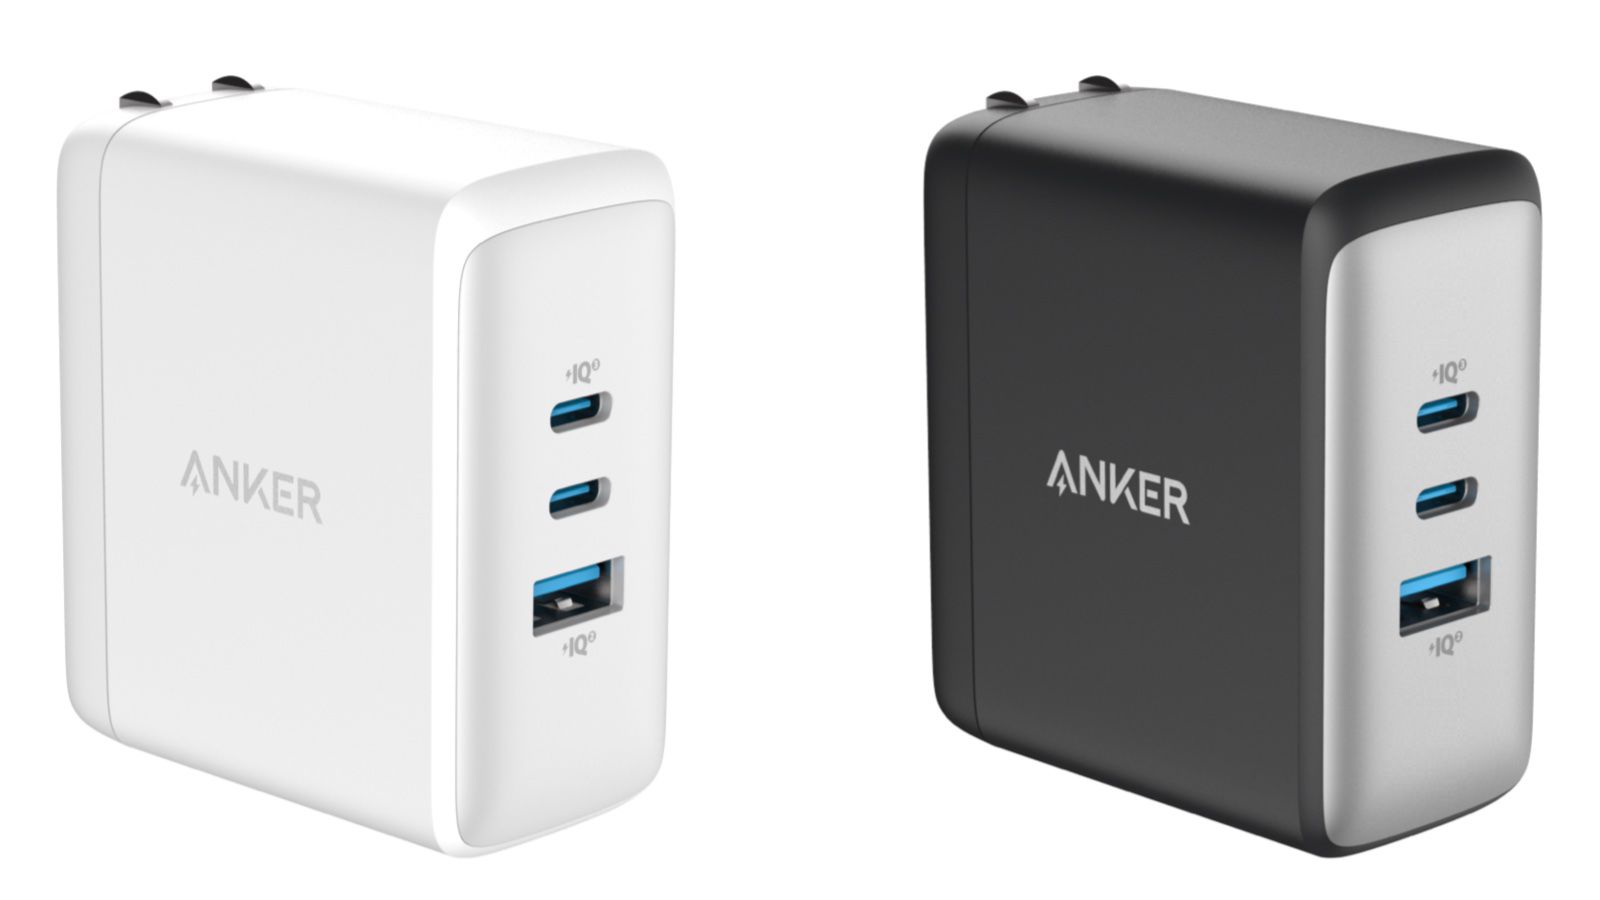 New Anker 736 GaN Charger Offers 3 USB ports and 100W output